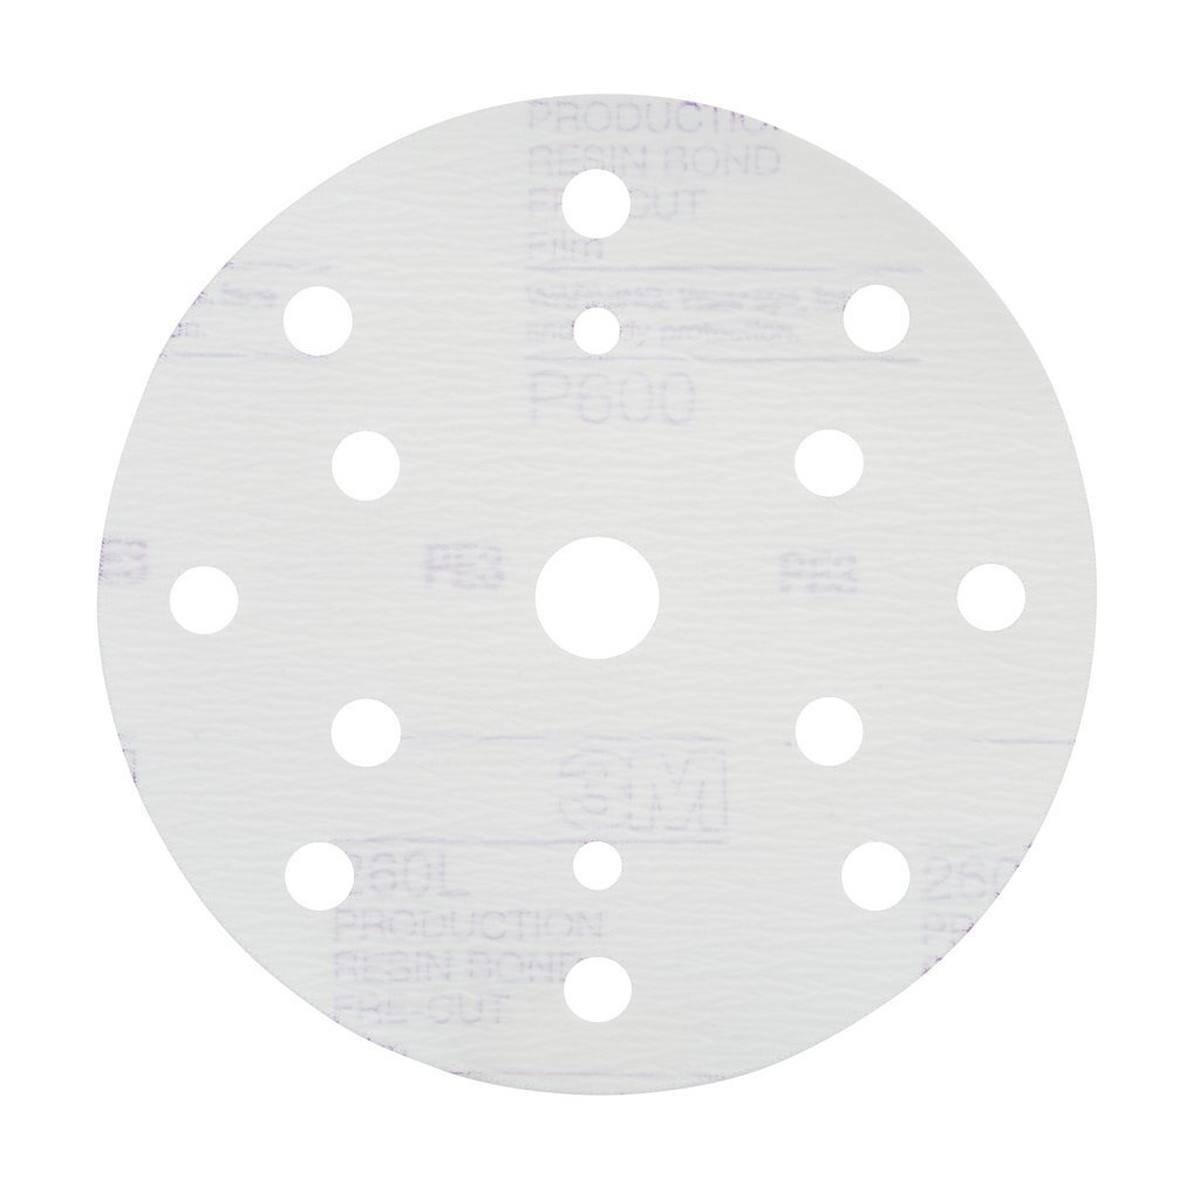 3M Hookit Velcro-backed disc 260L, white, 150 mm, P600, perforated 15 times, 51057